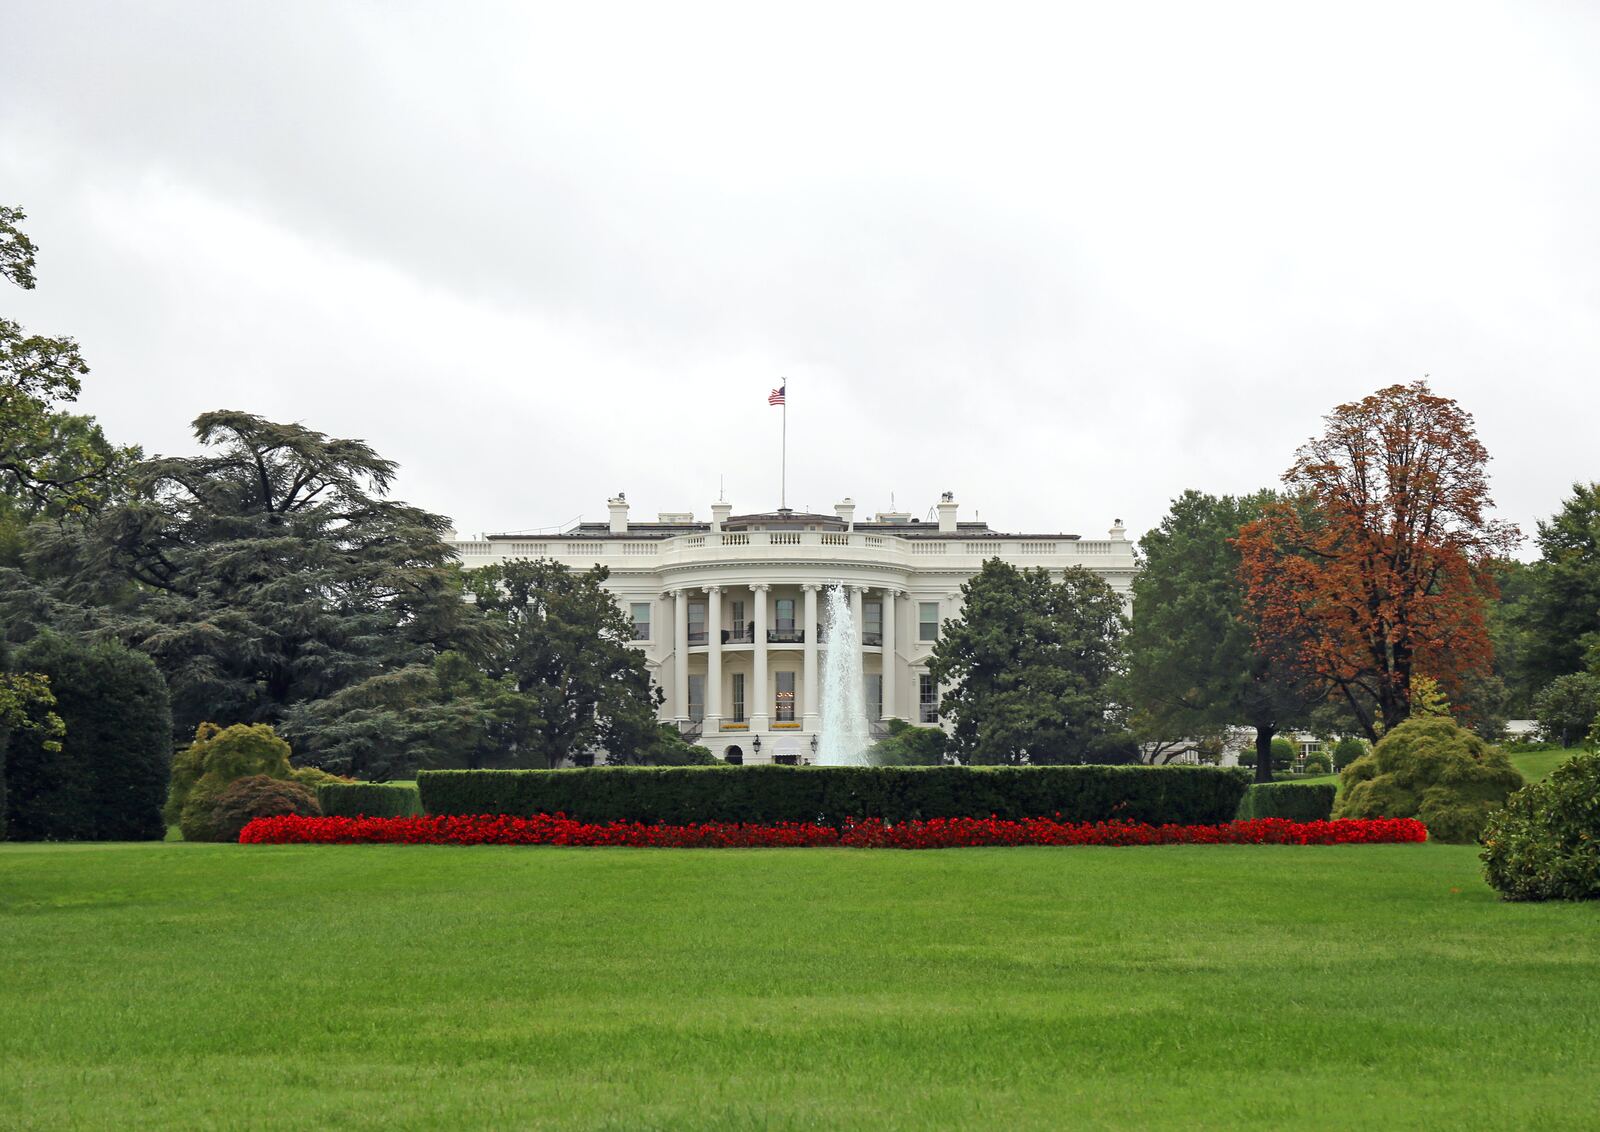 Image of The White House by Team PhotoHound